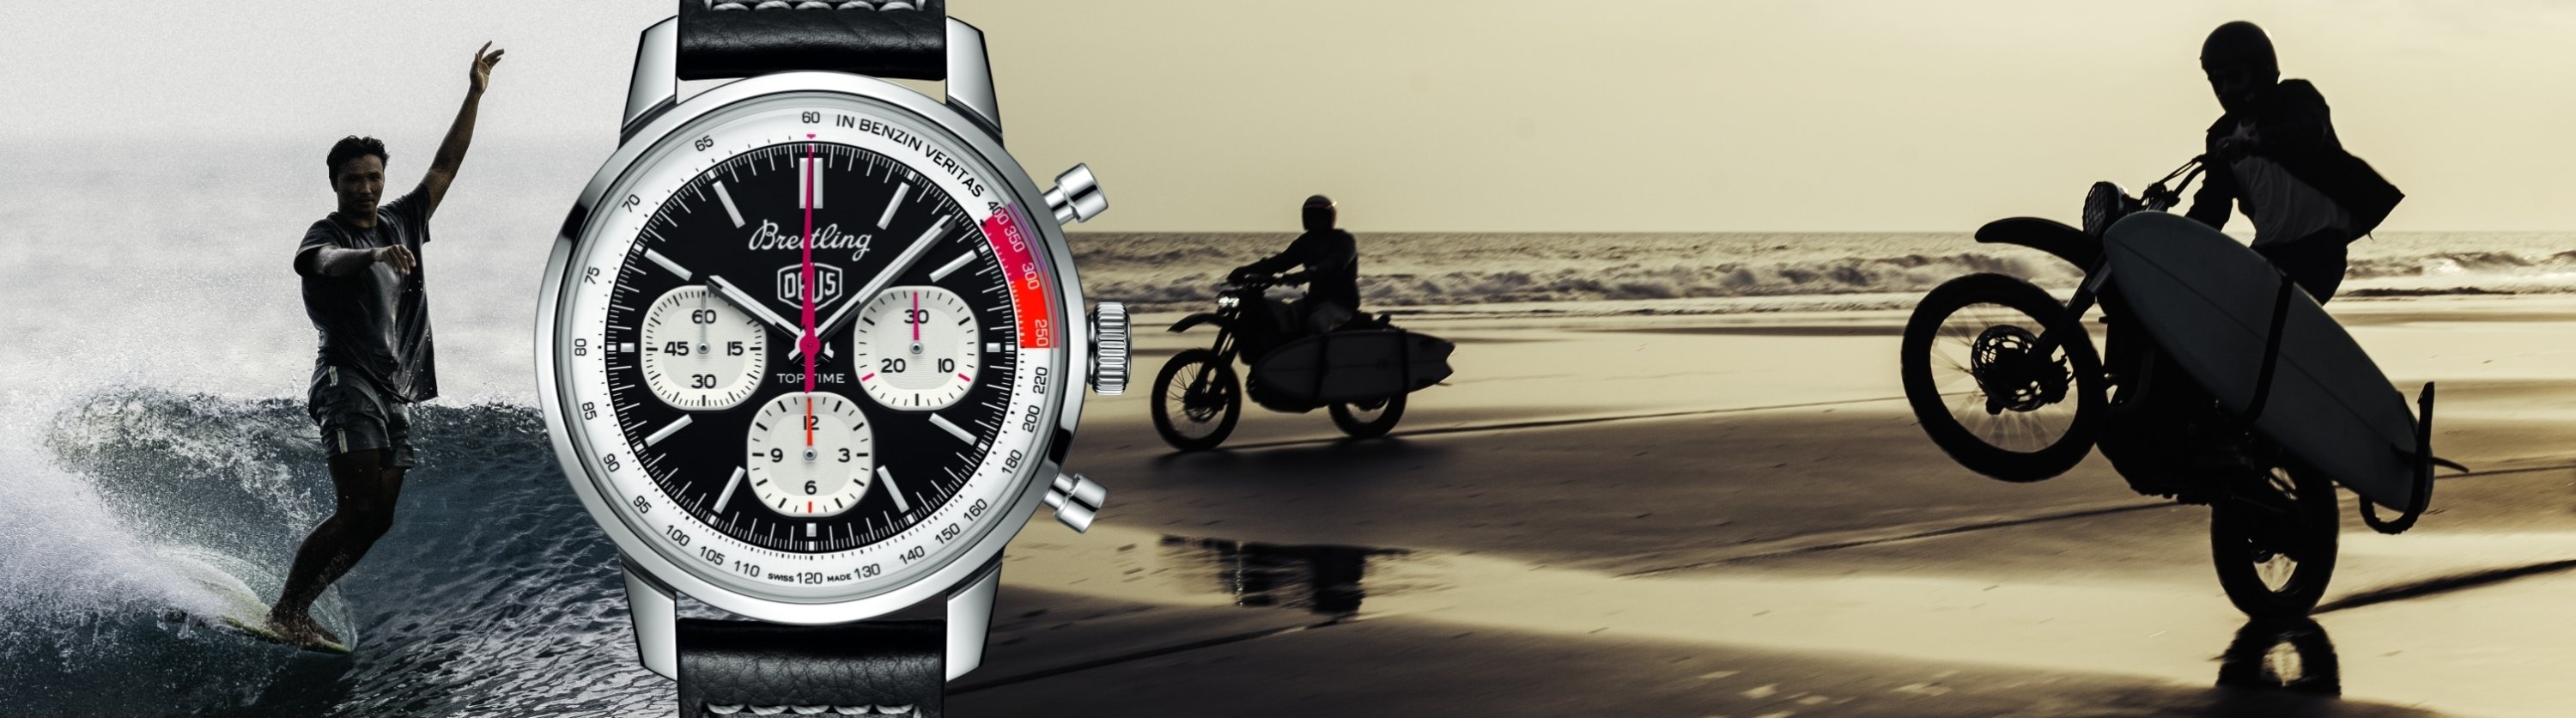 Breitling Reunites With Deus Ex Machina on a Watch for “Bikers, Boarders  and Surfers”